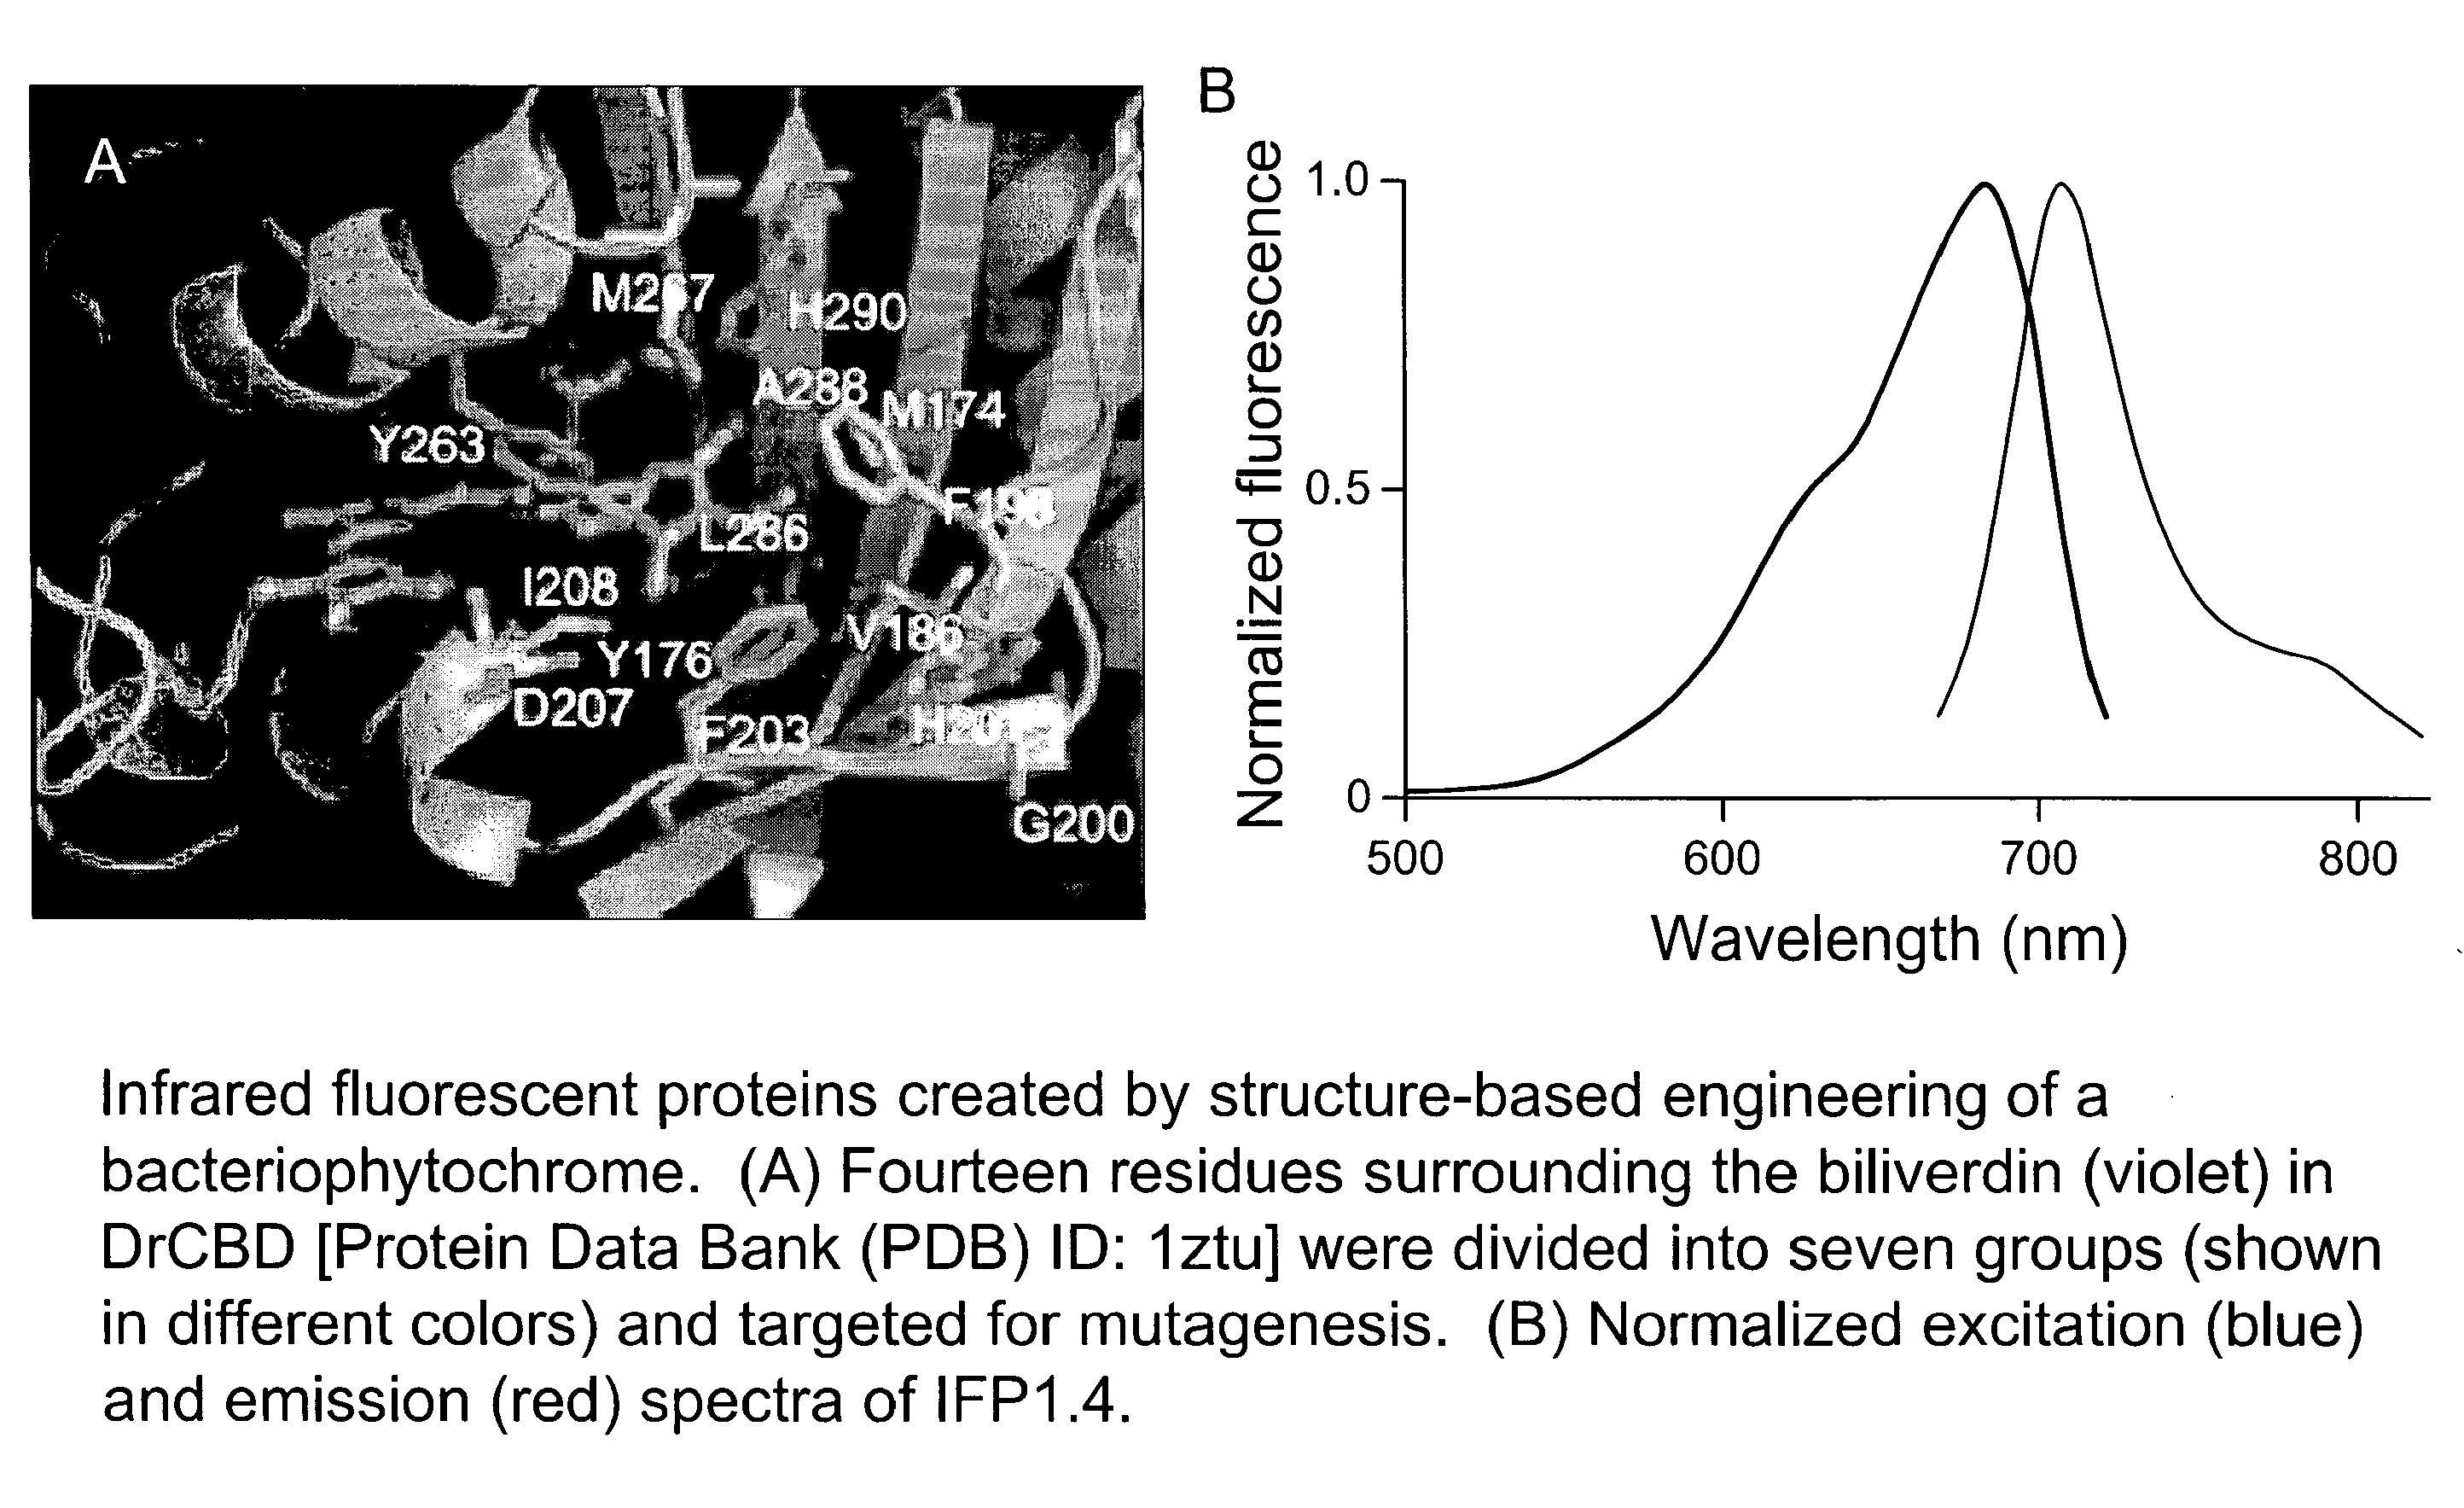 Proteins that fluoresce at infrared wavelengths or generate singlet oxygen upon illumination